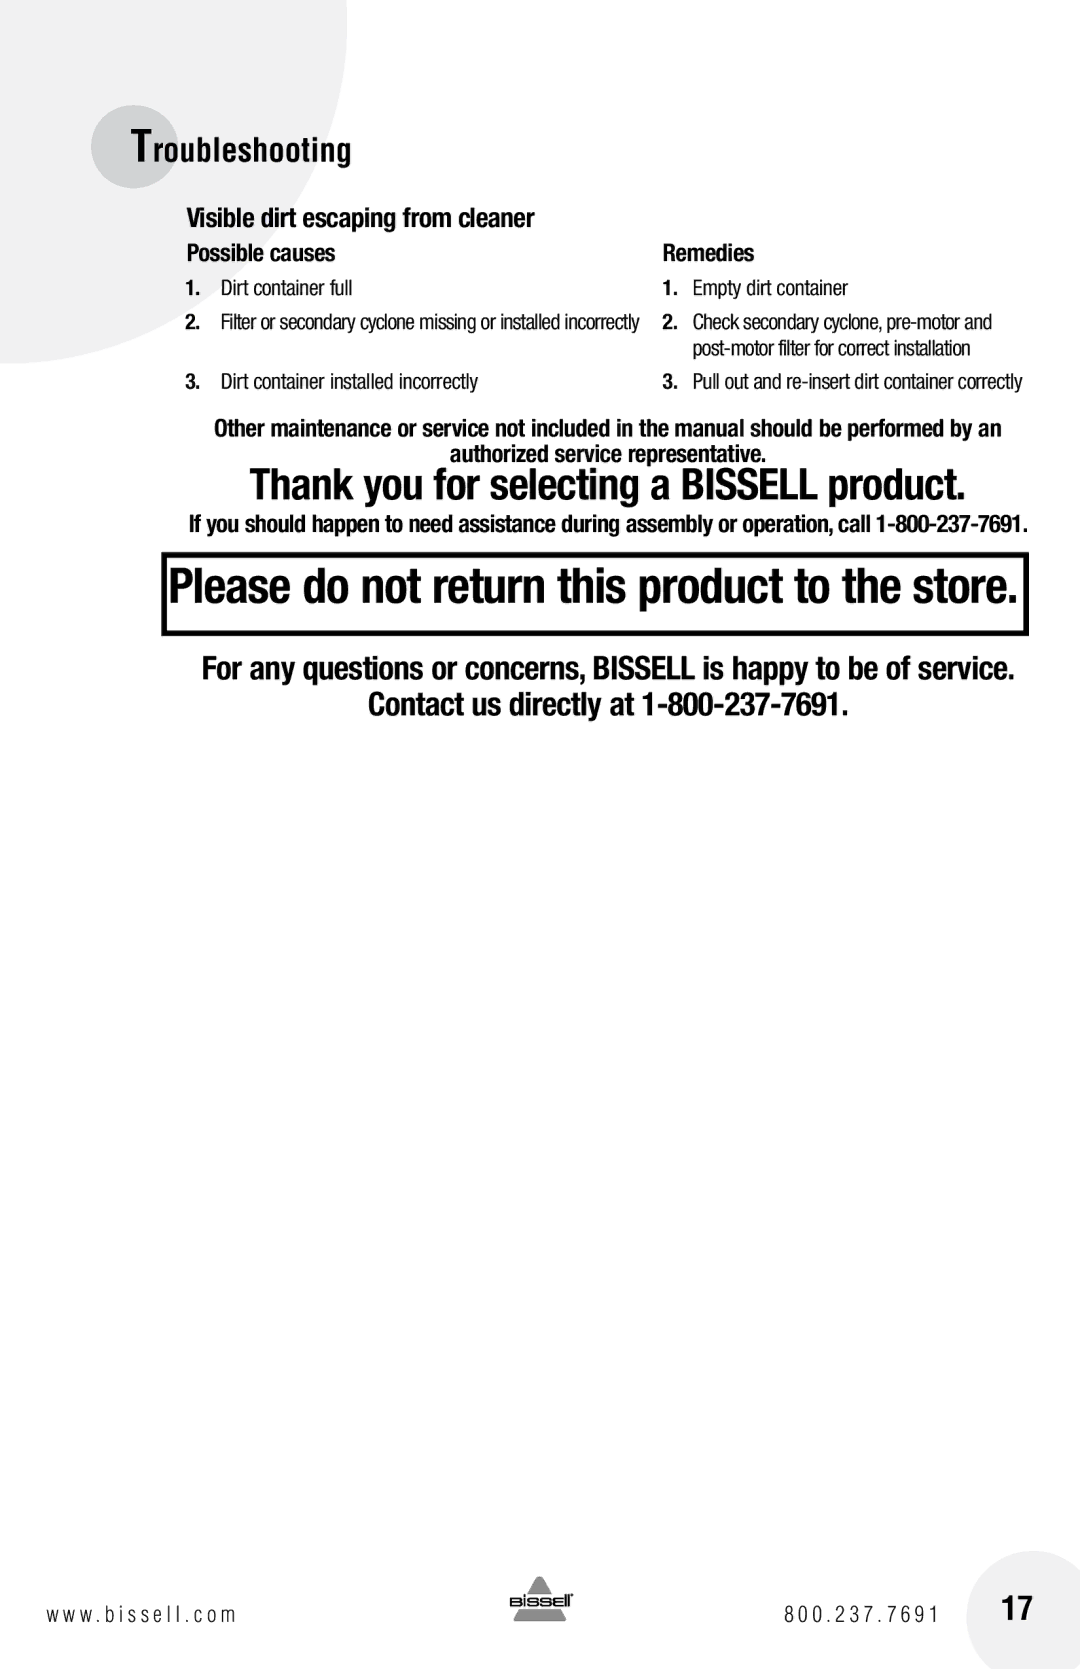 Bissell 89Q9, 18Z6 warranty Contact us directly at, Visible dirt escaping from cleaner, Authorized service representative 